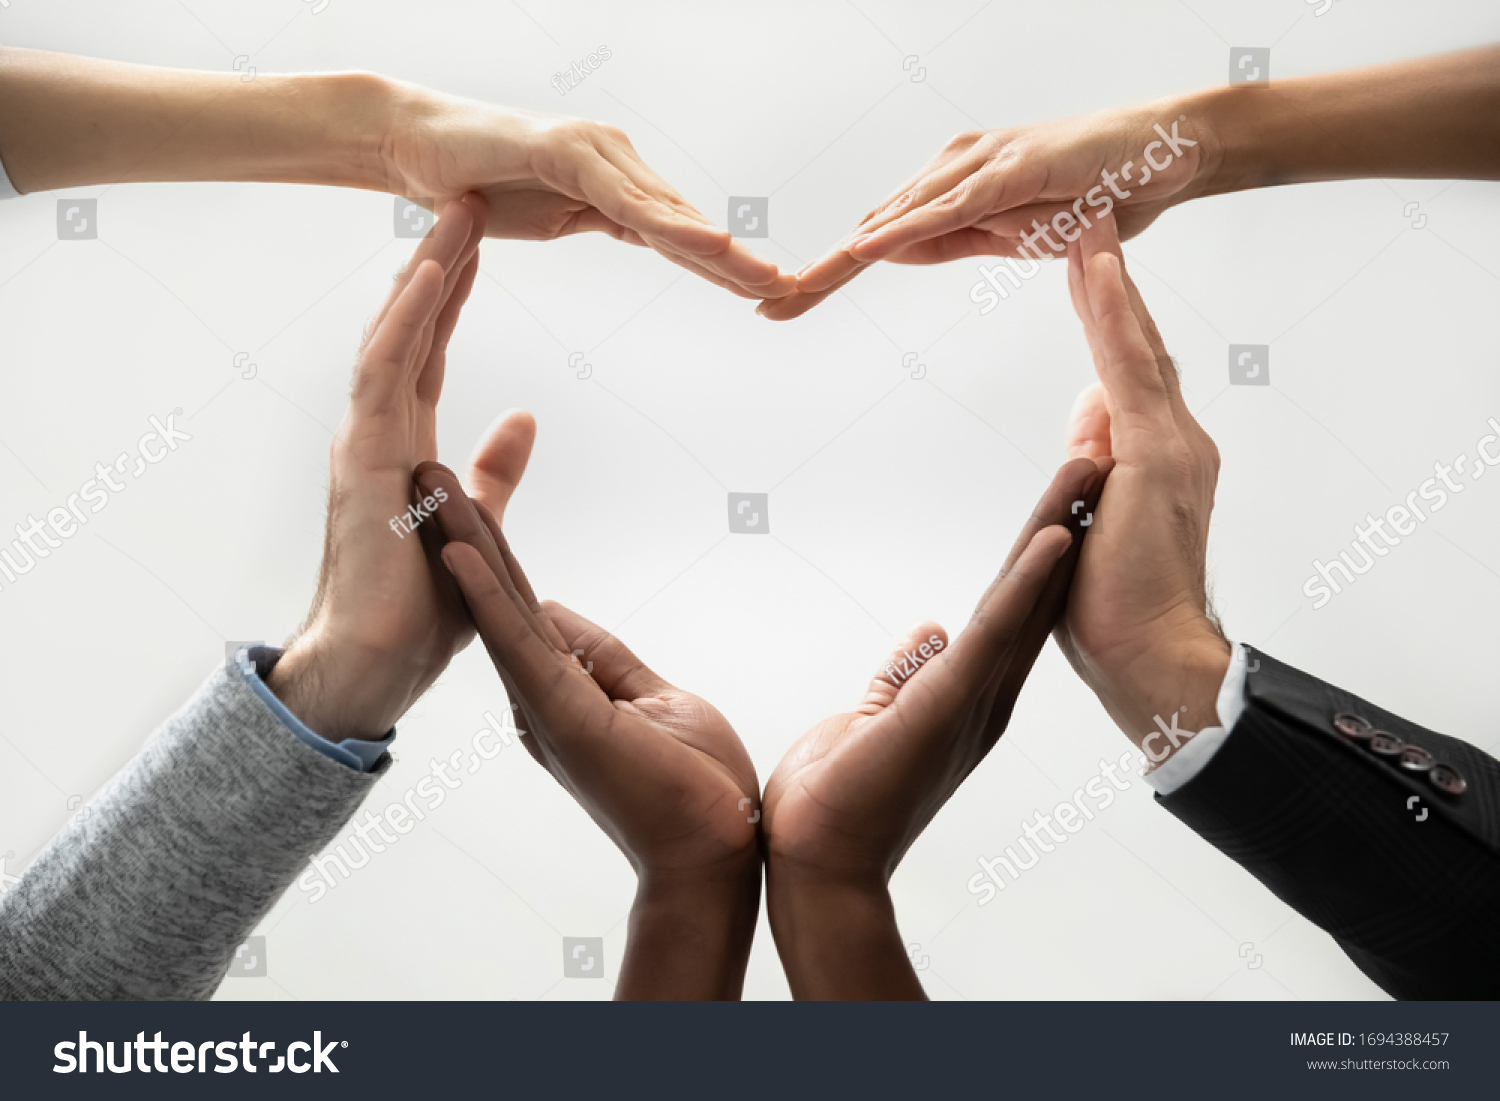 Close up bottom view concept of diverse business people join hands forming heart. Show unity and support, protection of business. Multiracial colleagues involved in team building activity for charity. #1694388457